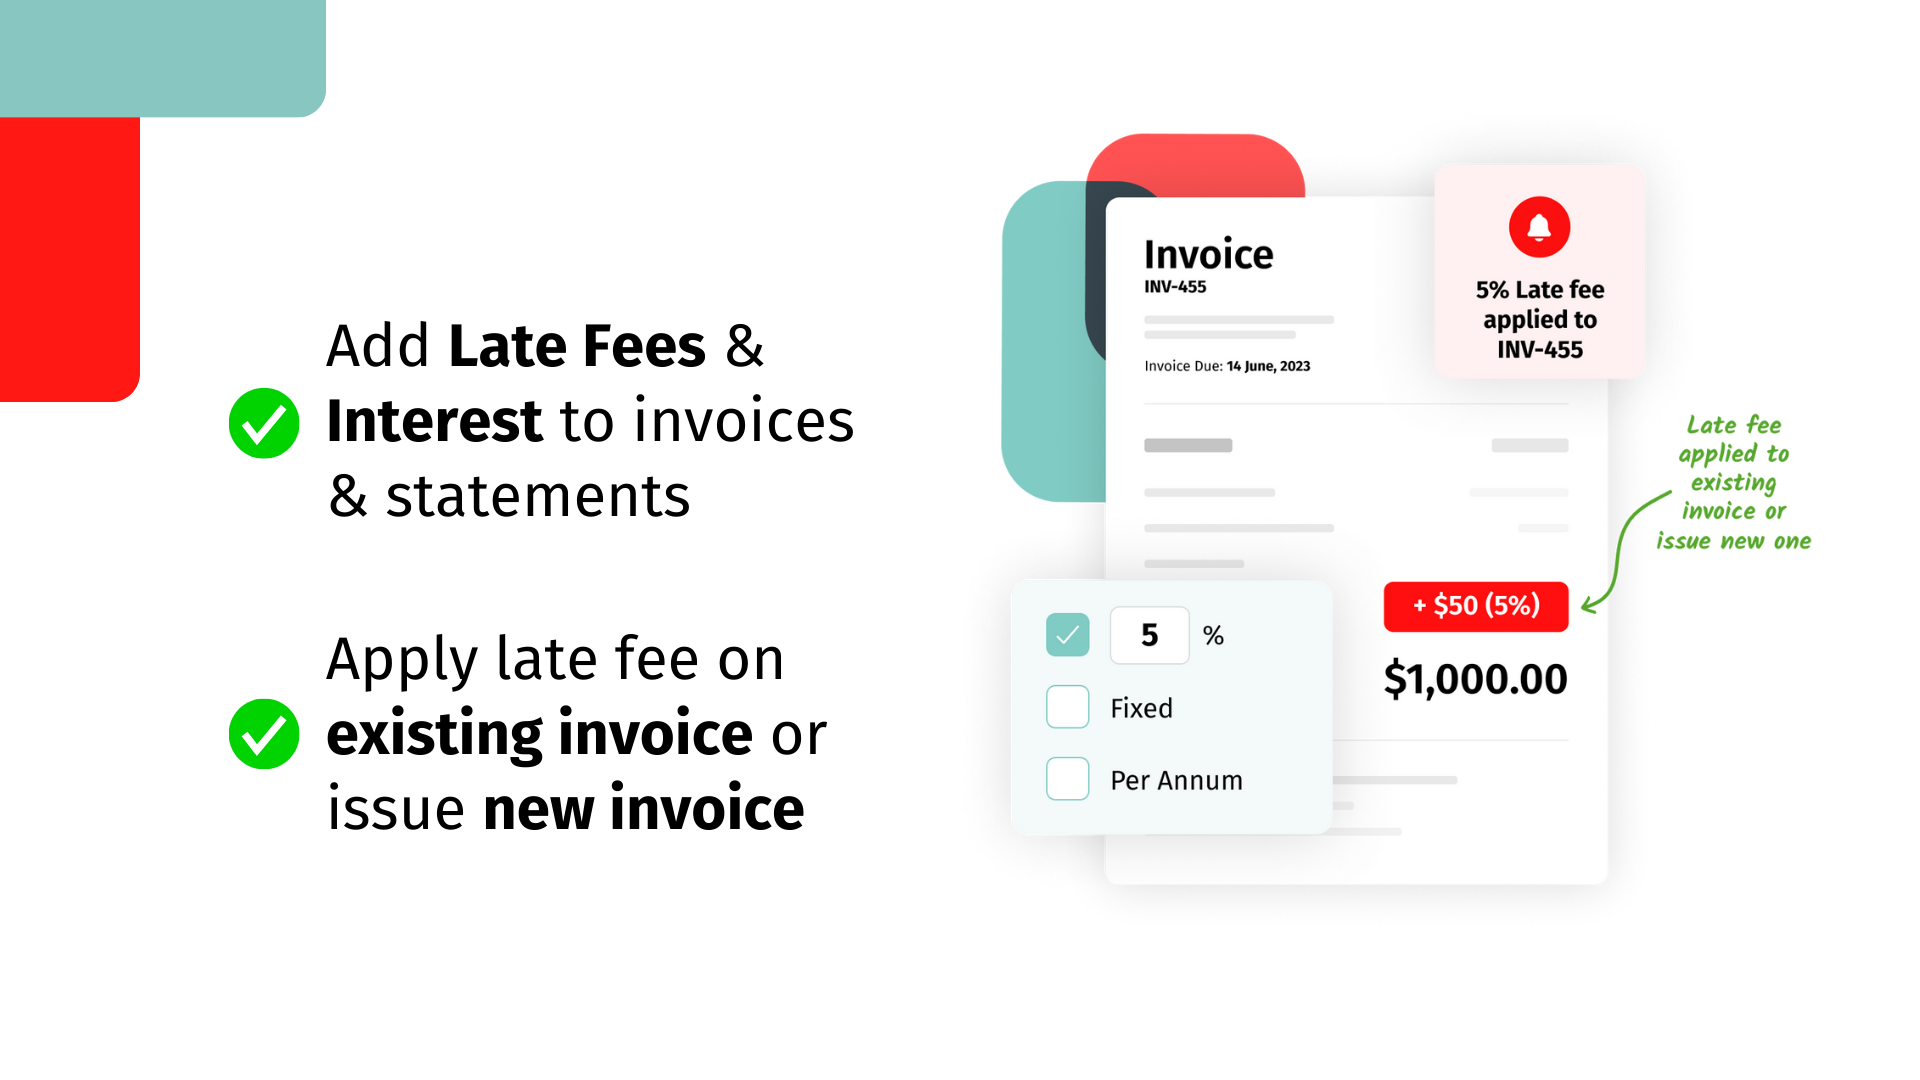 Add late fees and interest to invoices and statements